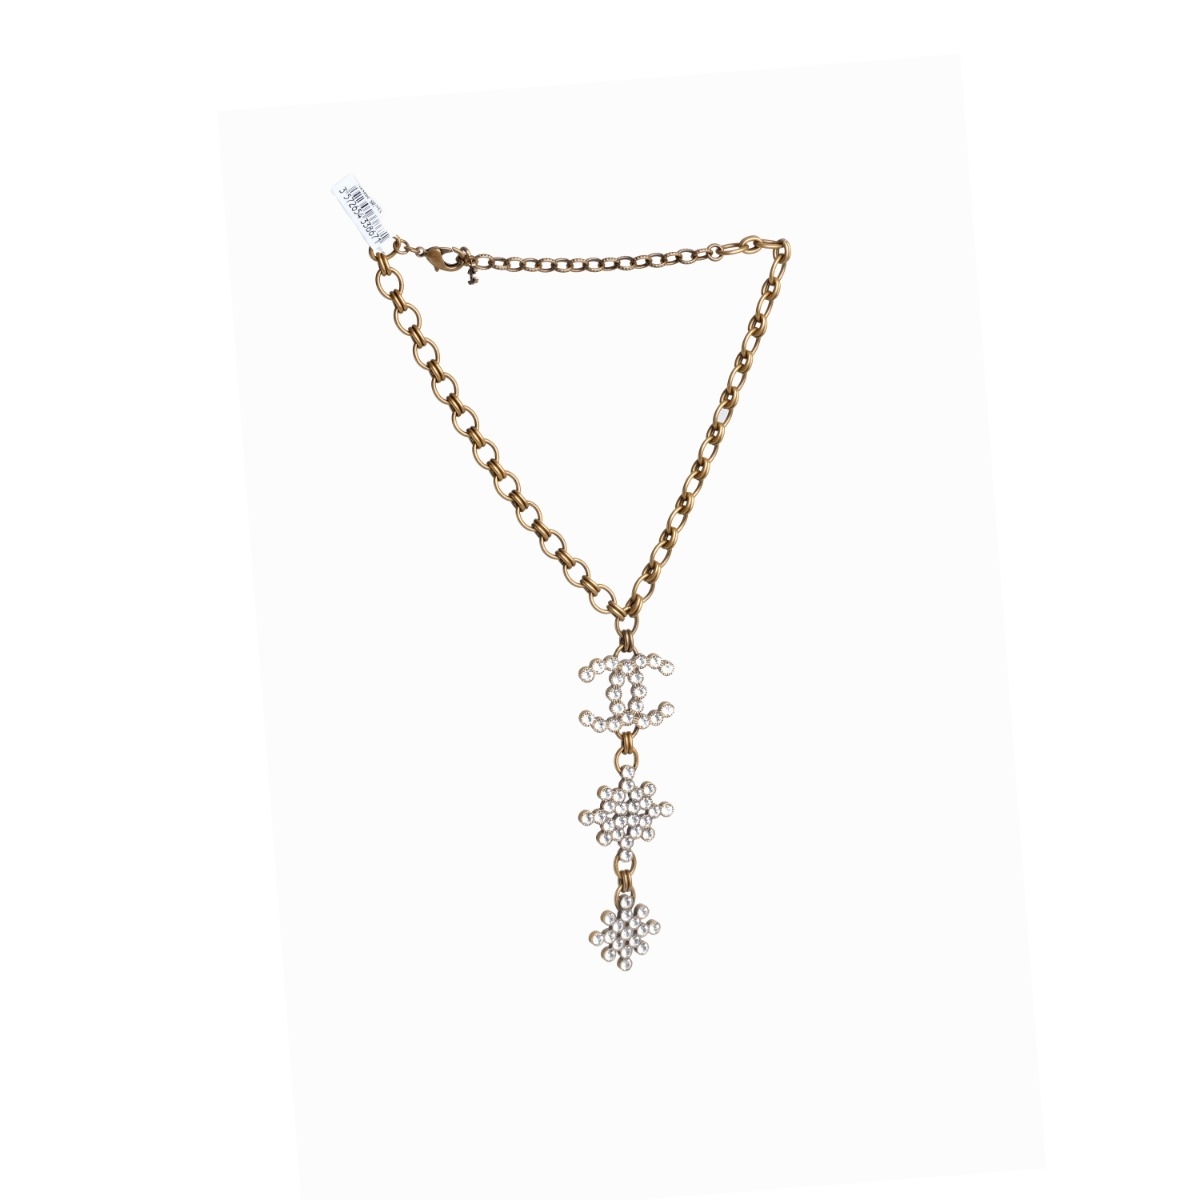 Chanel 2019 Resin, Faux Pearl & Strass Curb Chain Drop Necklace